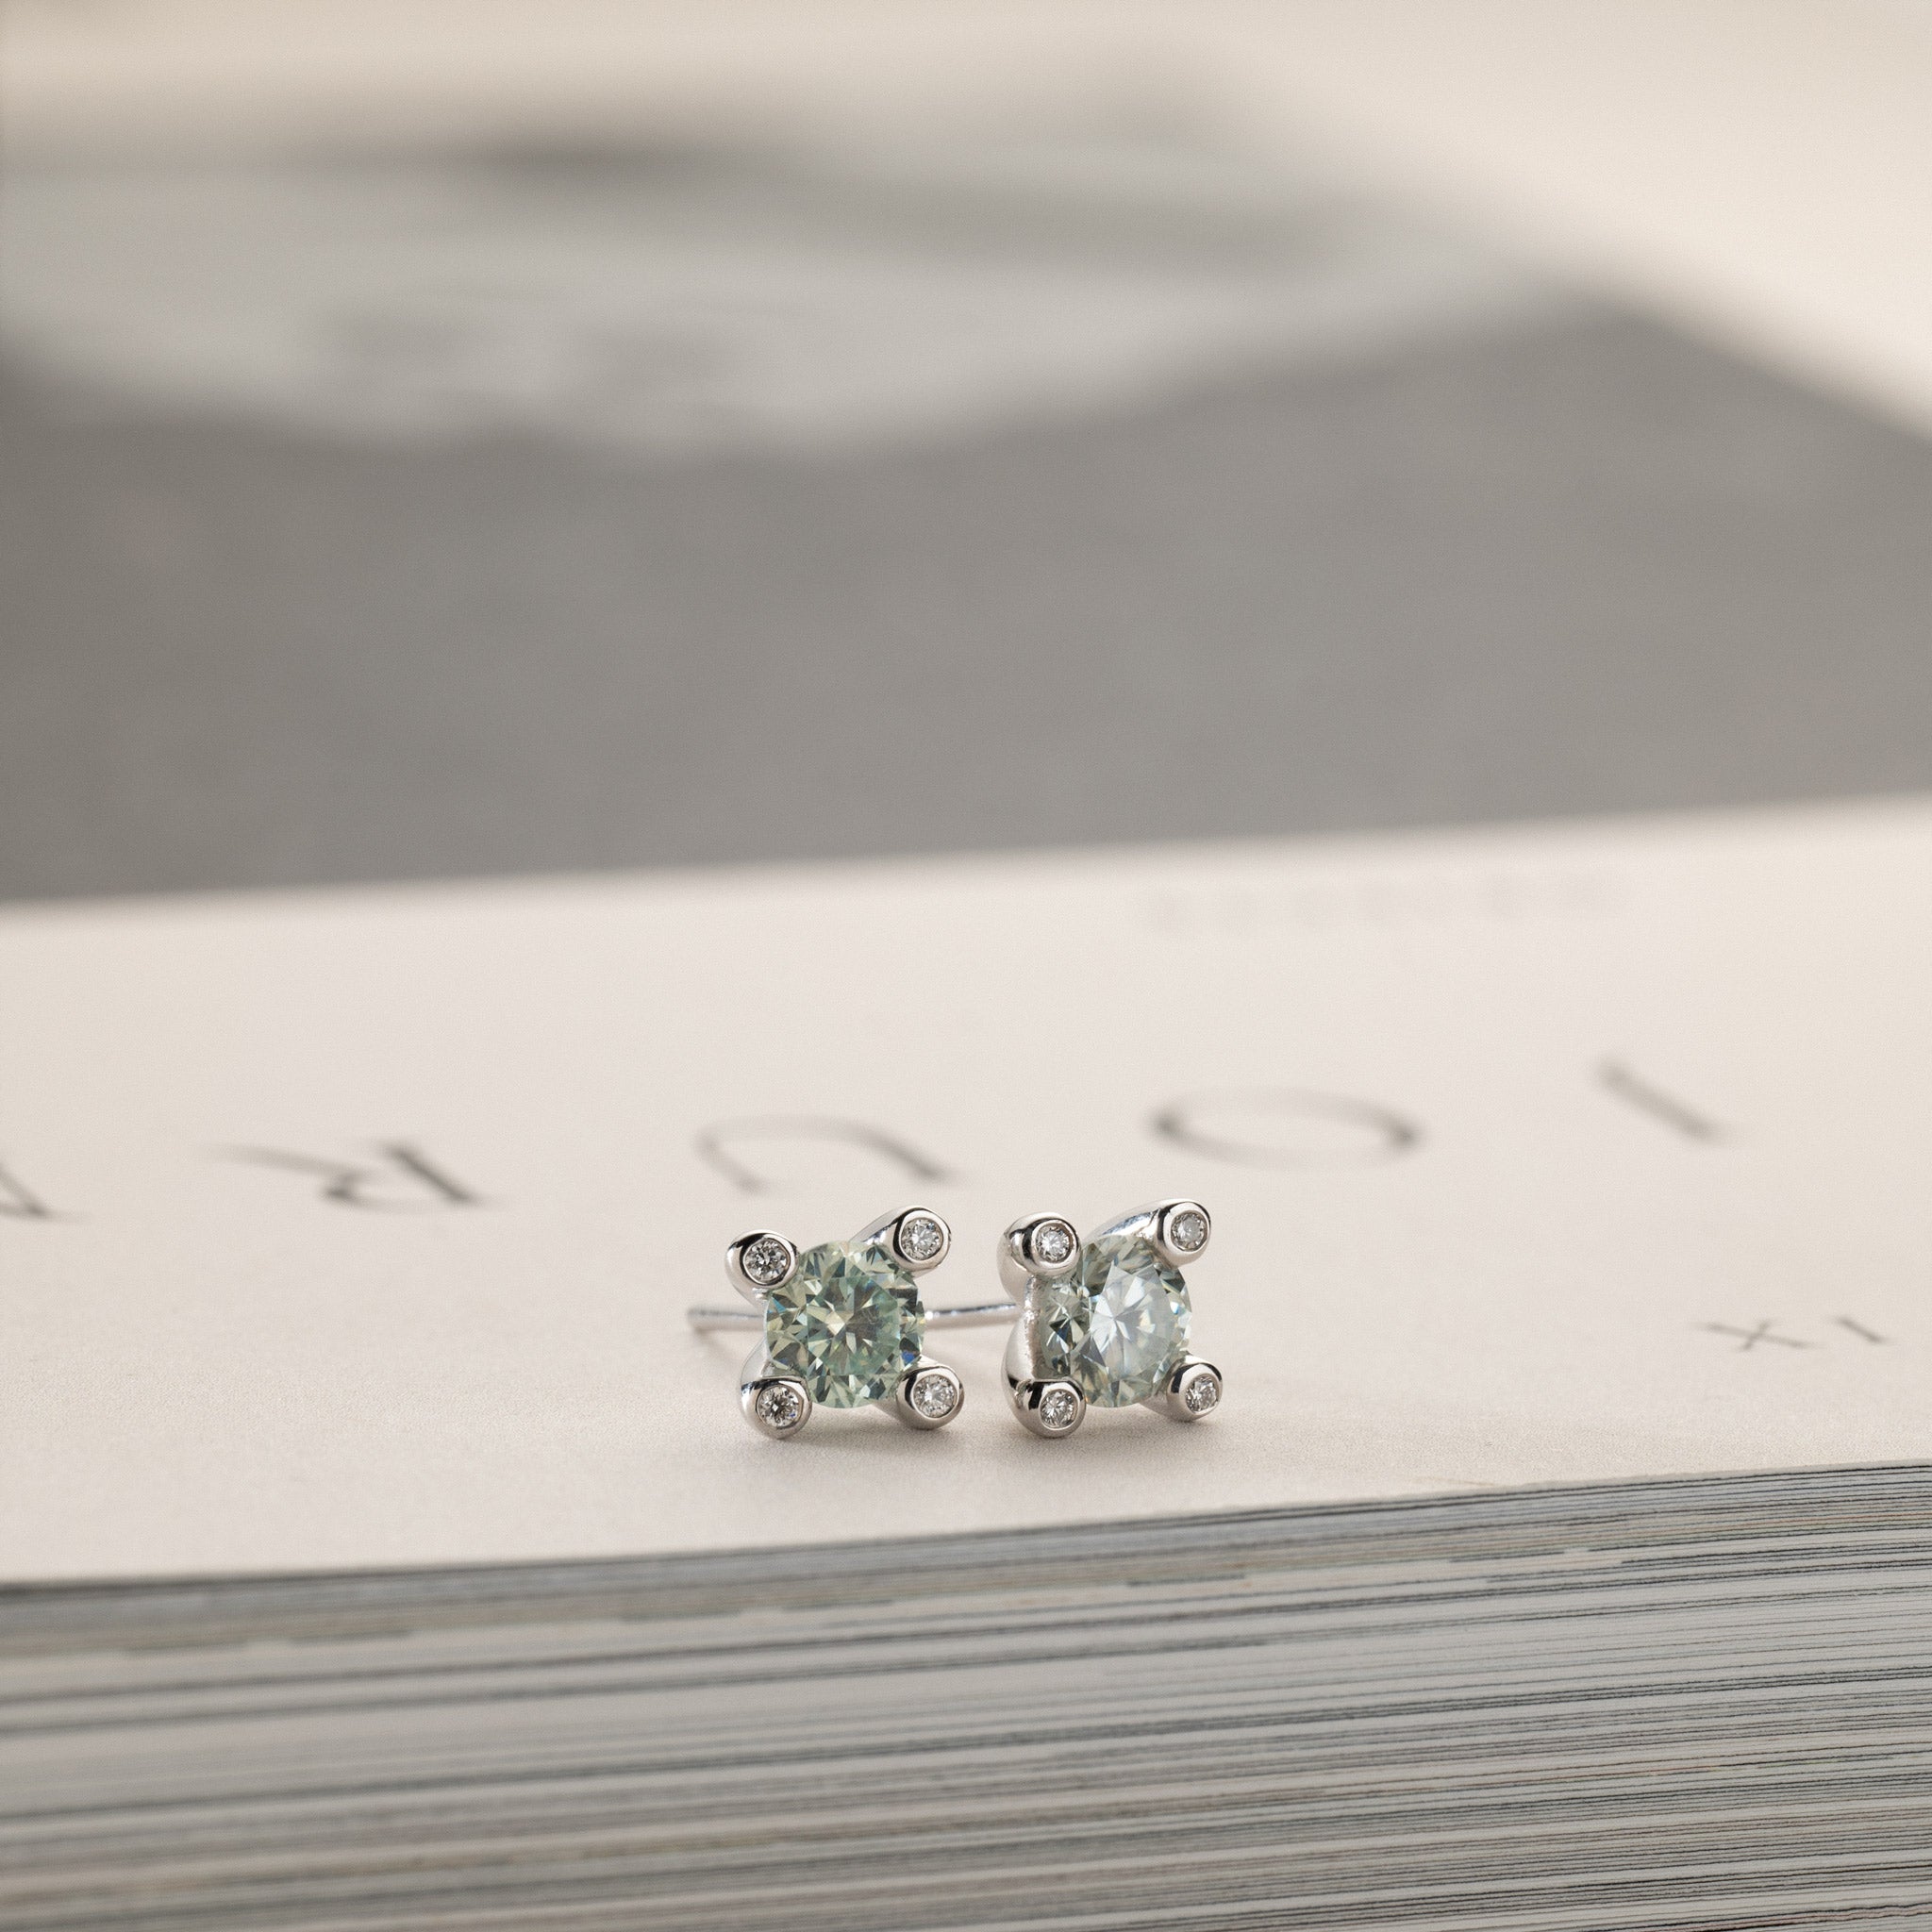 2x0.50ct green moissanite solitaire stud earrings silver diamonds in crown Miriam